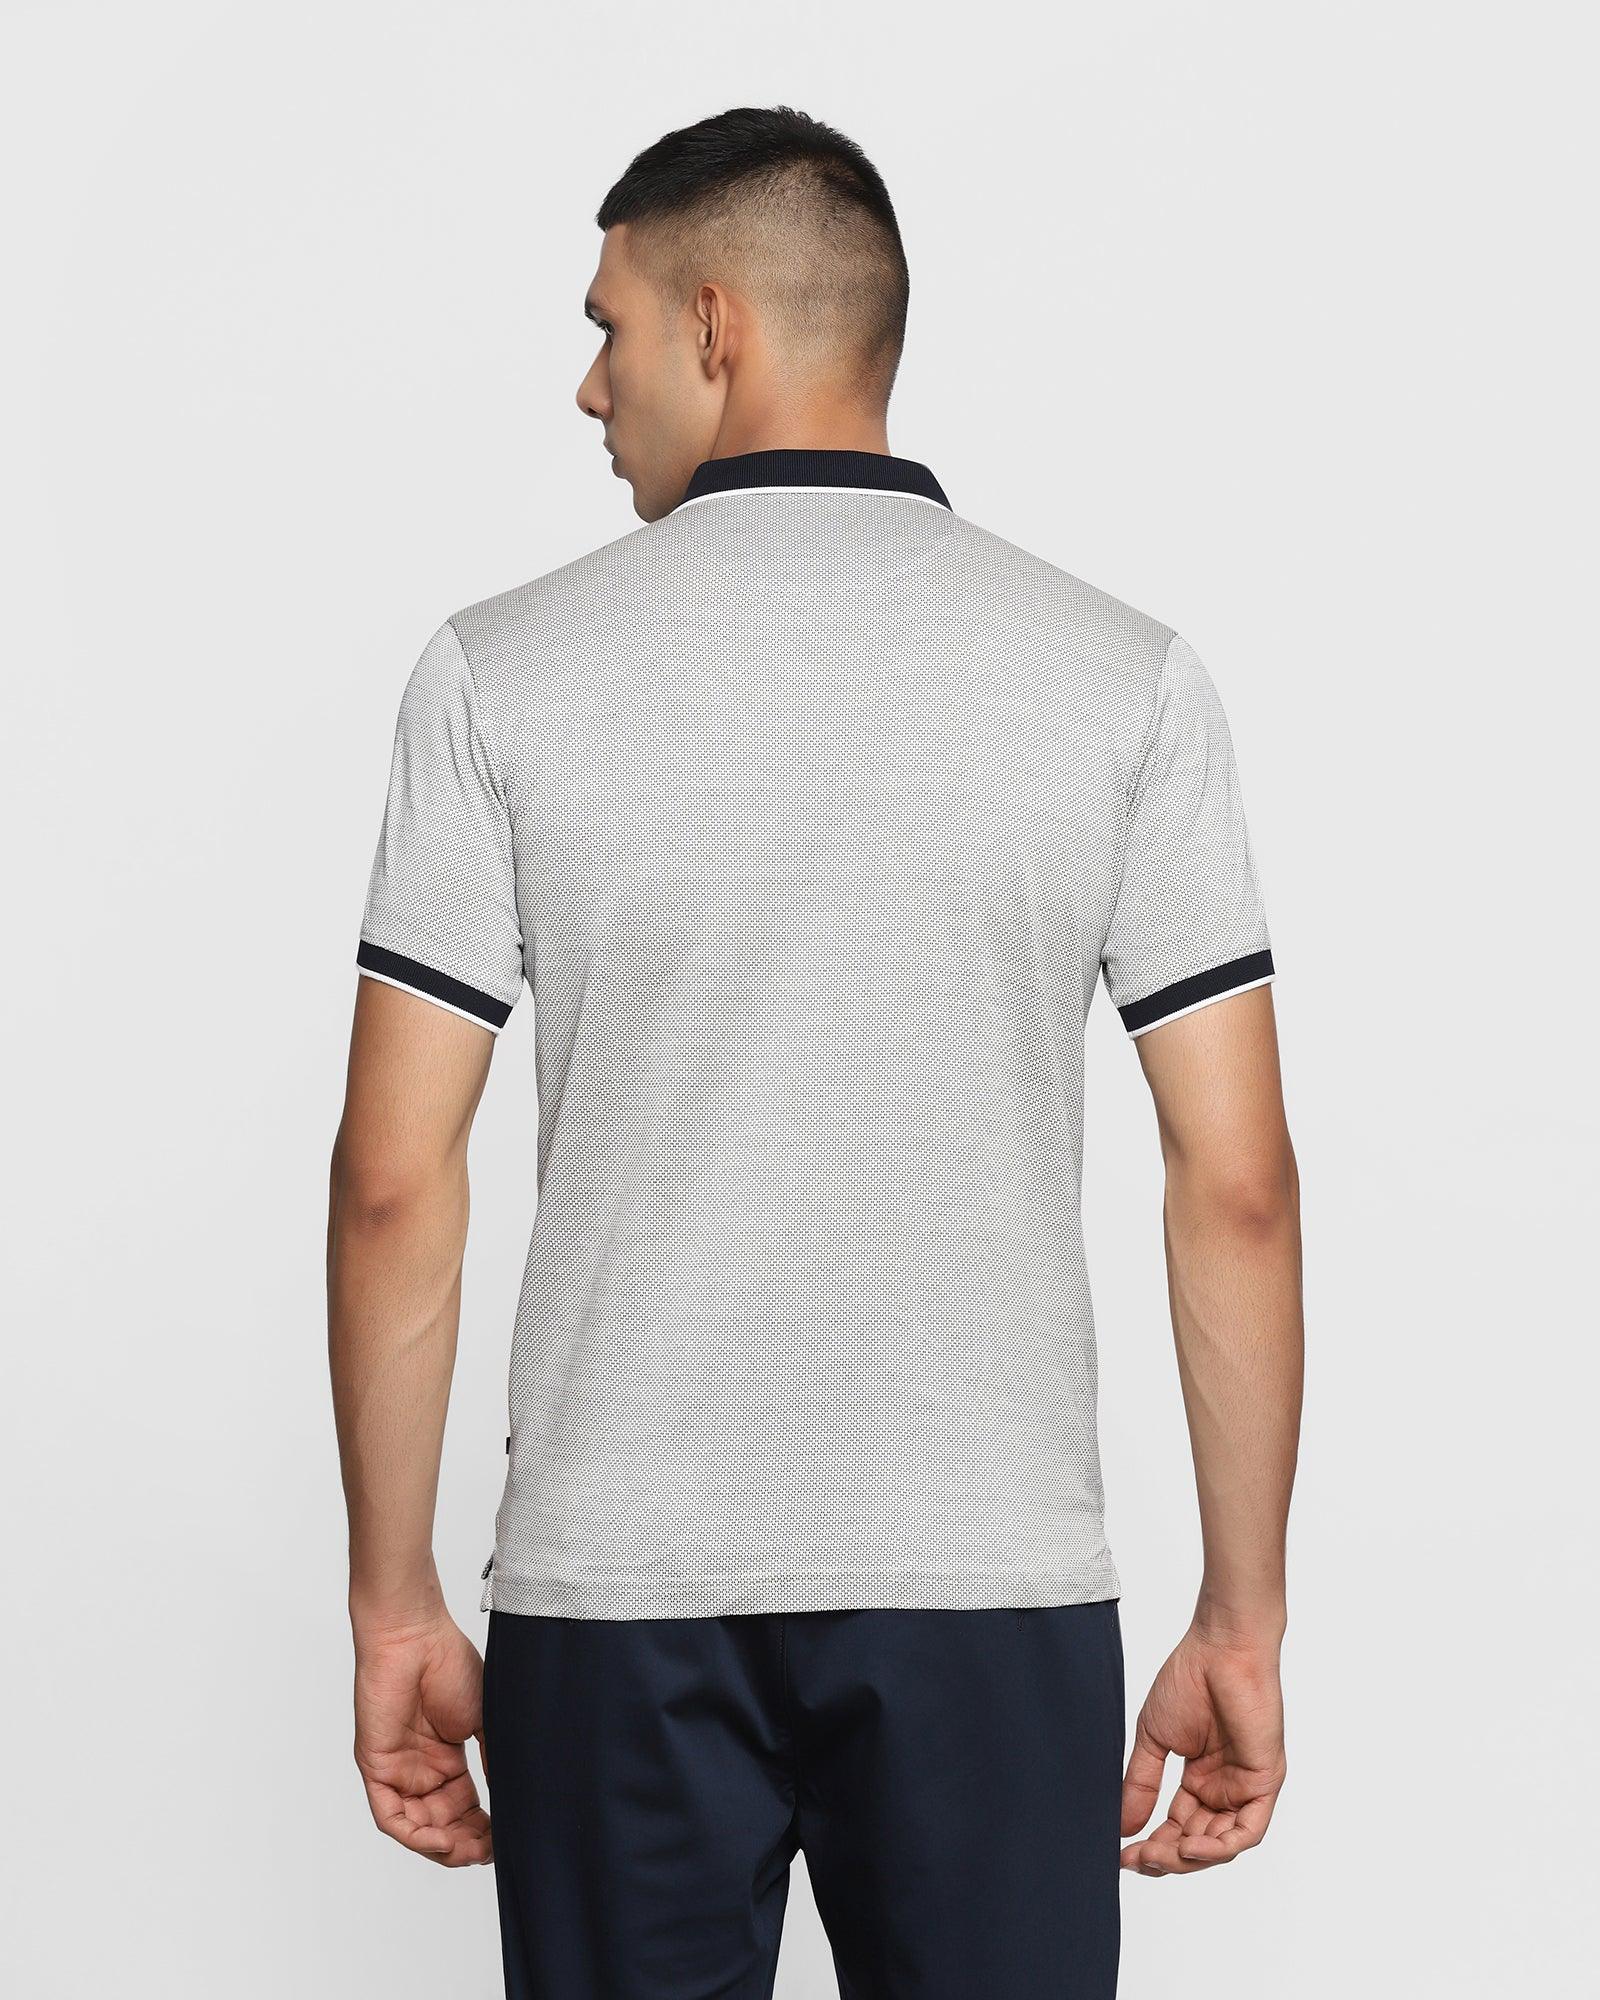 Polo Navy Textured T Shirt - Connor